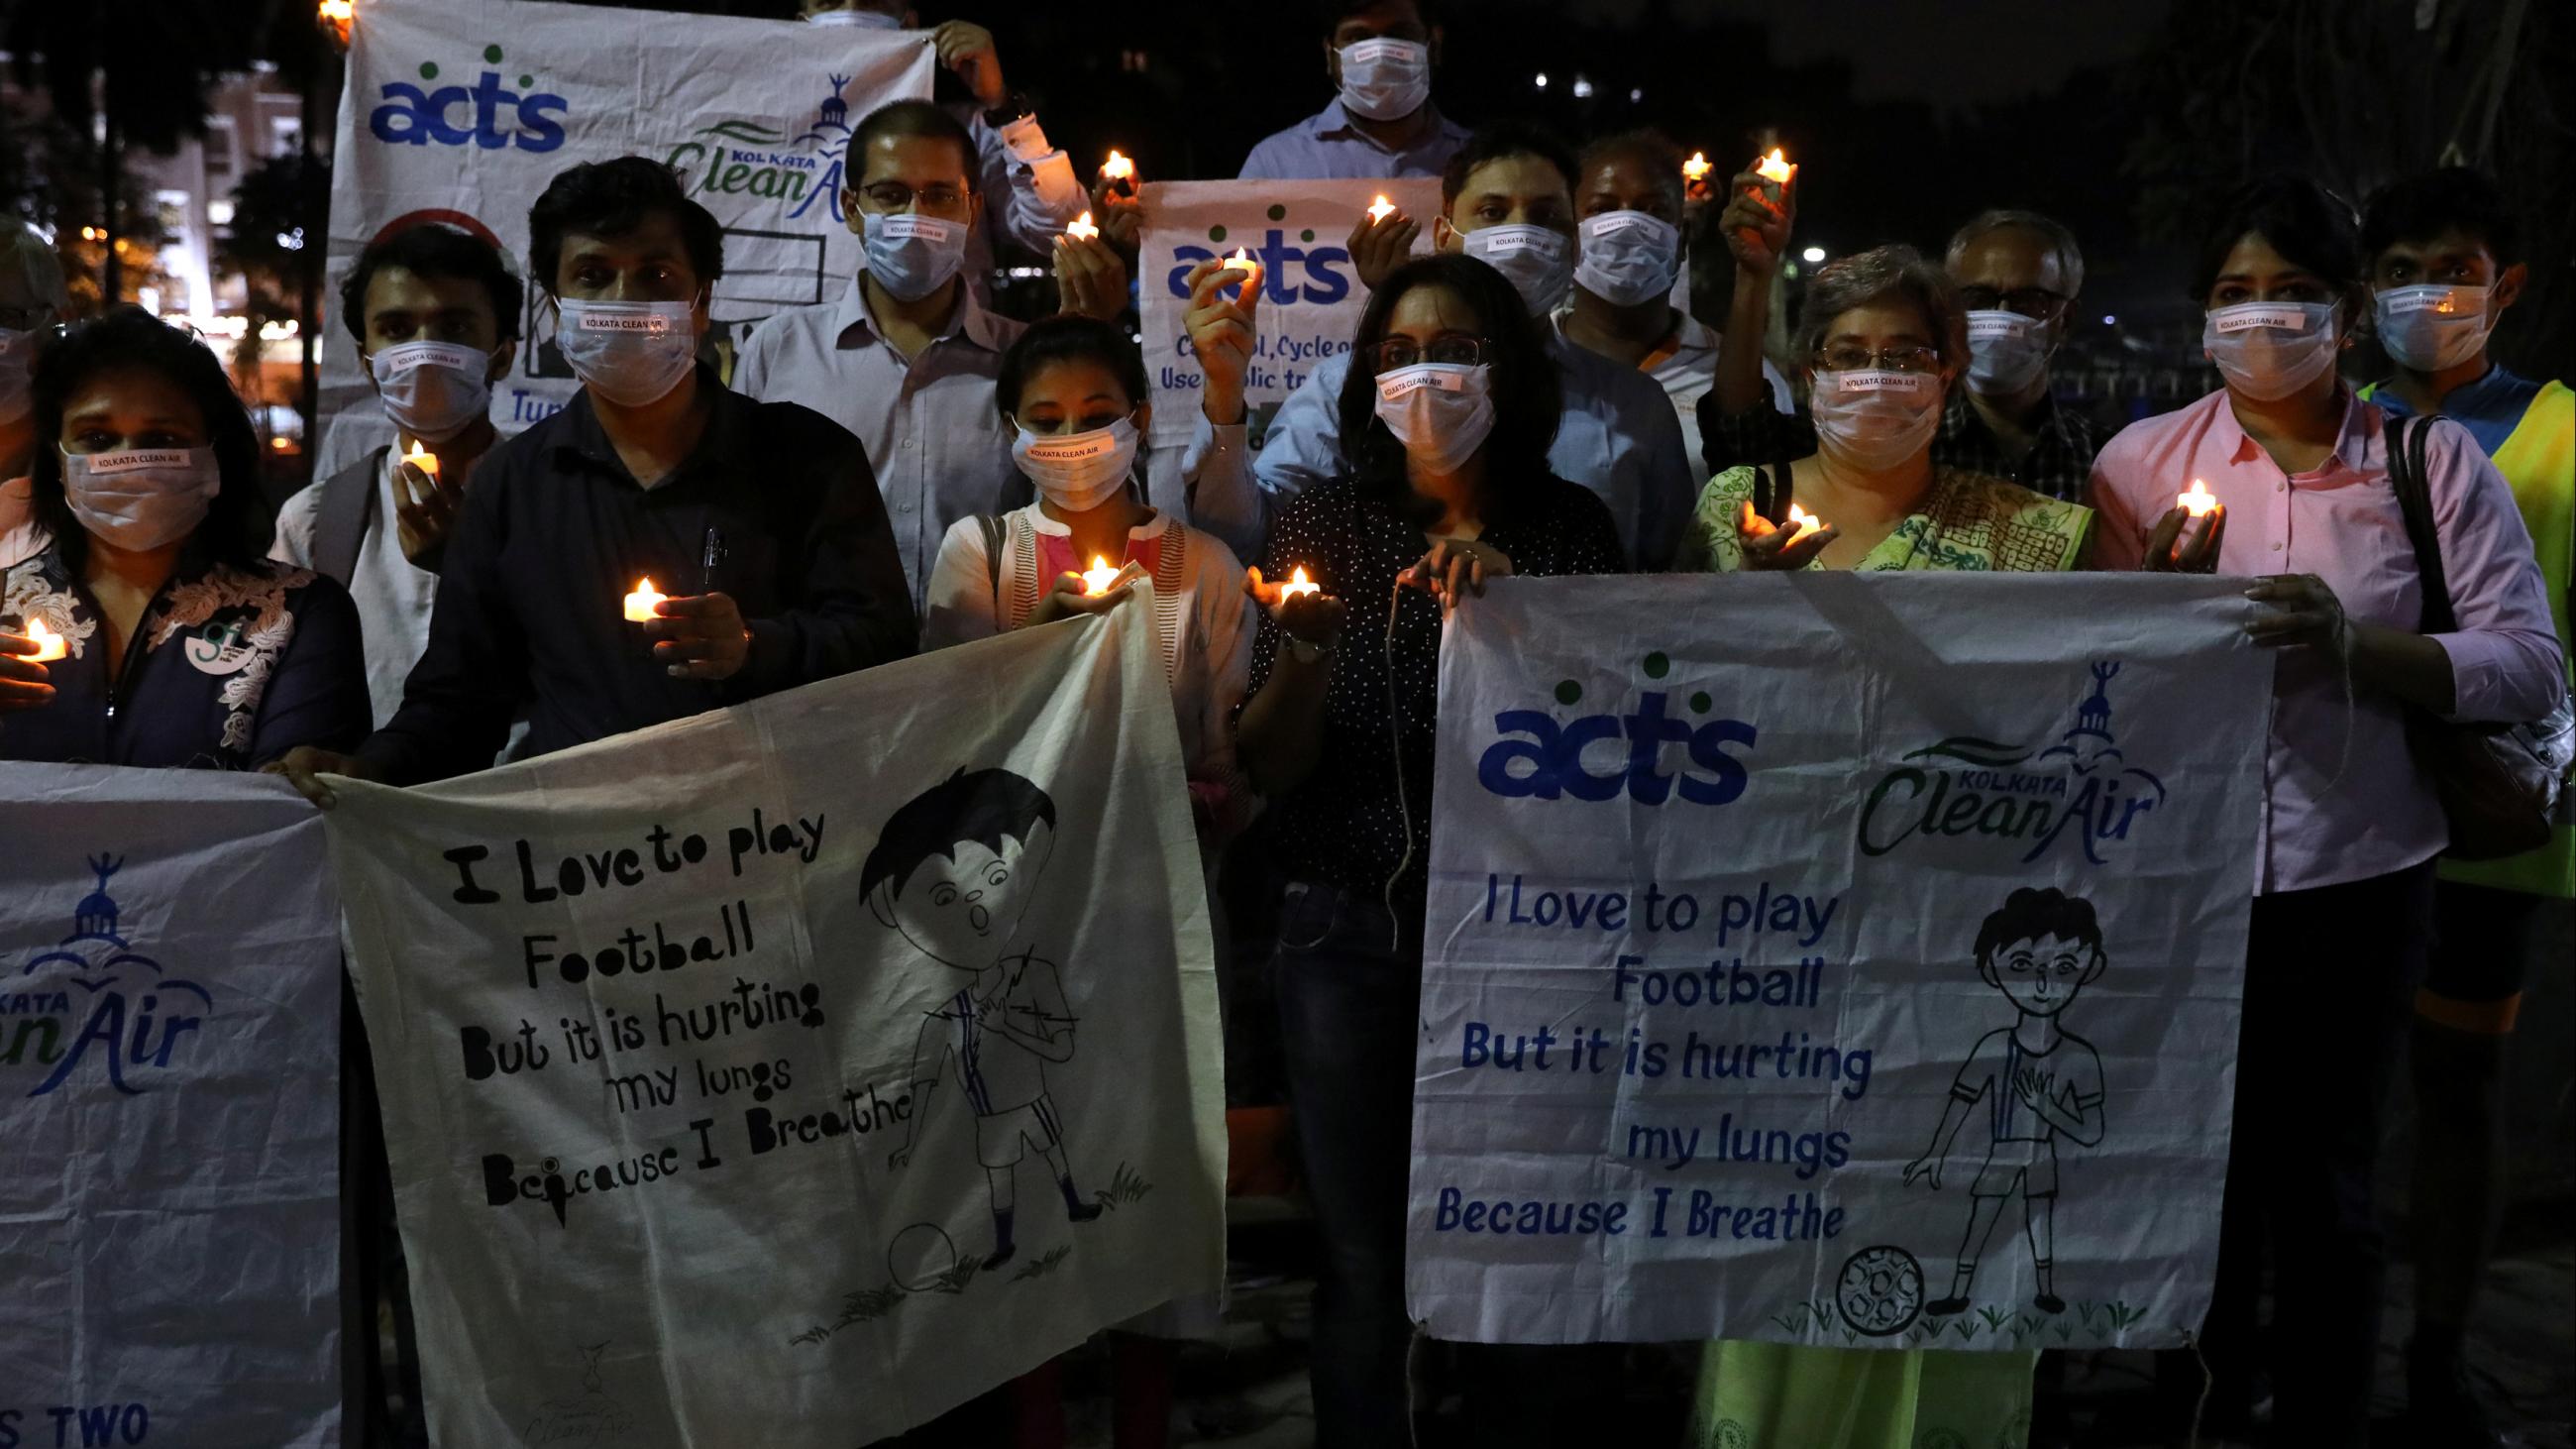 People wearing protective masks hold electric candles as they take part in a campaign to raise awareness about air pollution in Kolkata, India, on November 12, 2019.